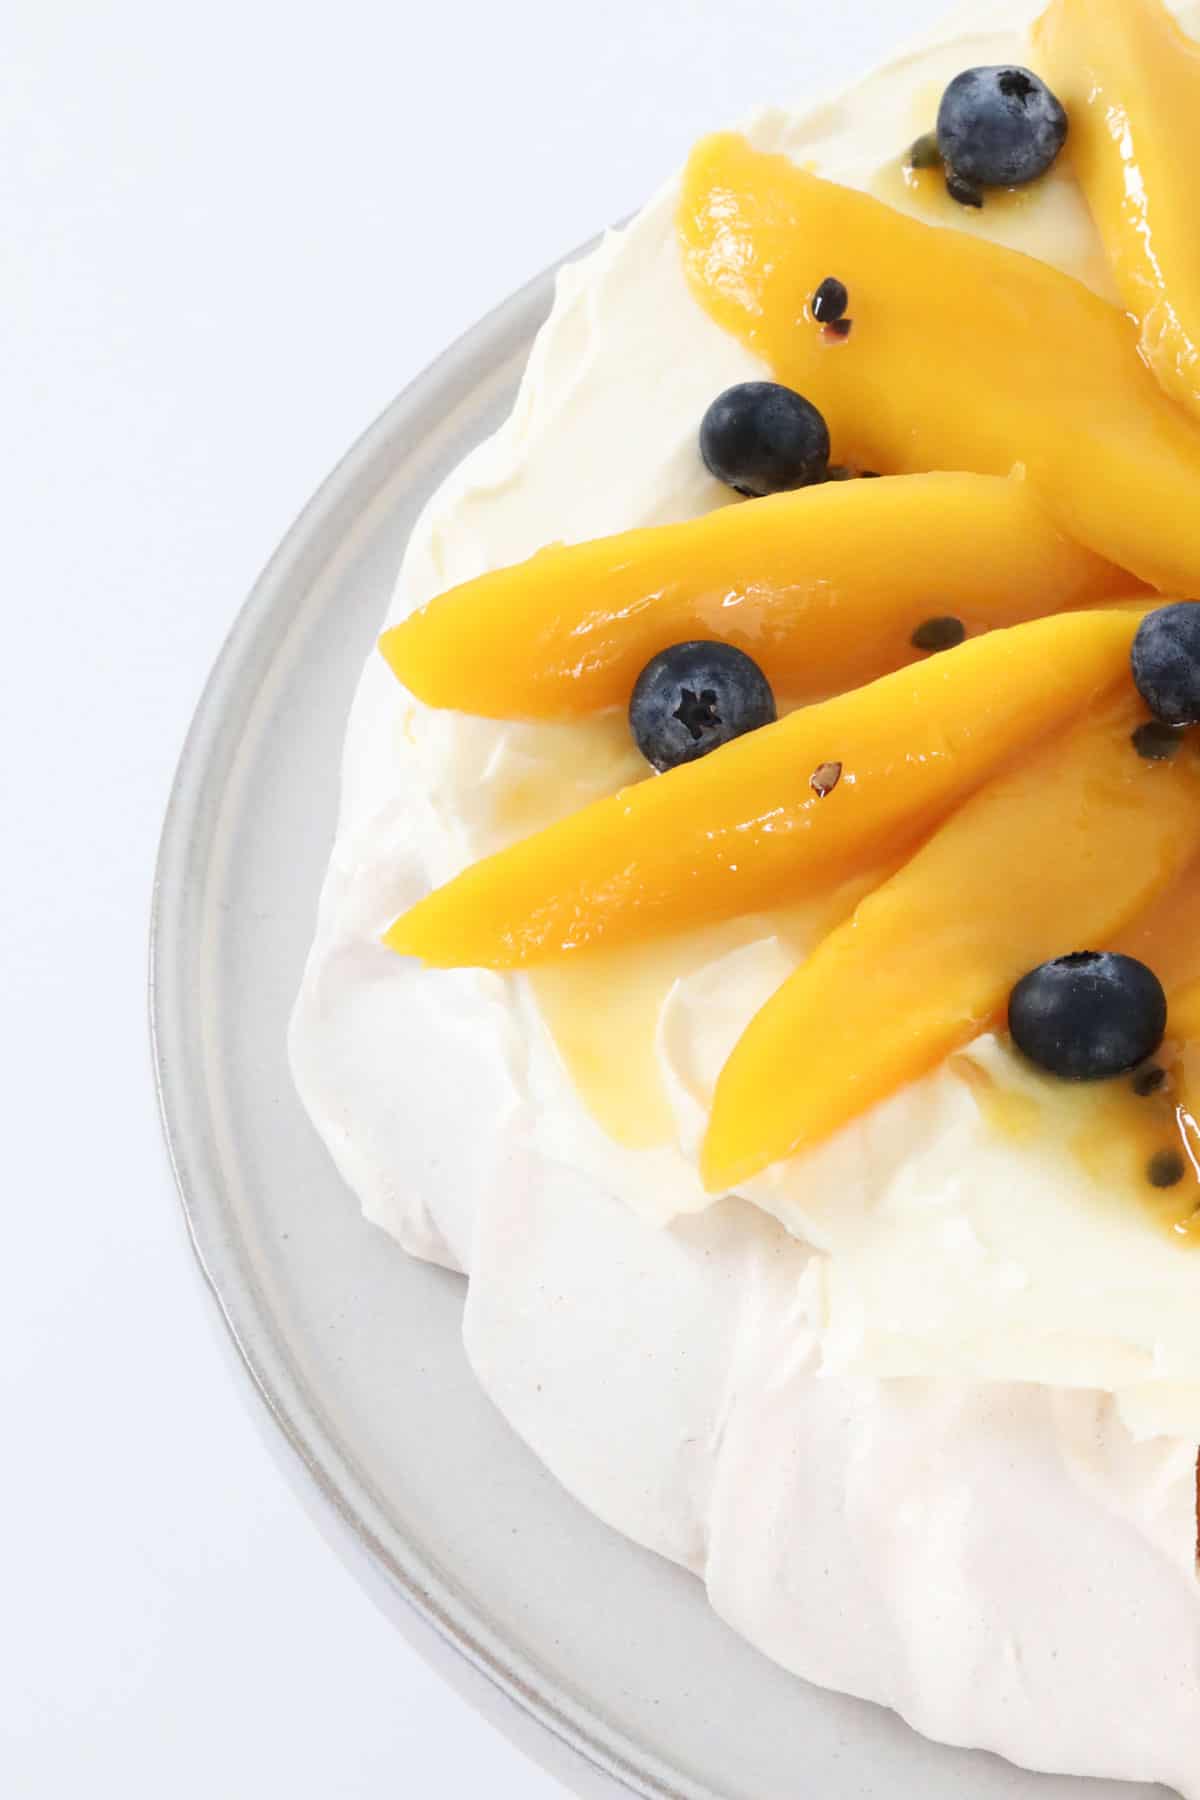 The pavlova decorated with whipped cream, mango slices and fresh blueberries..